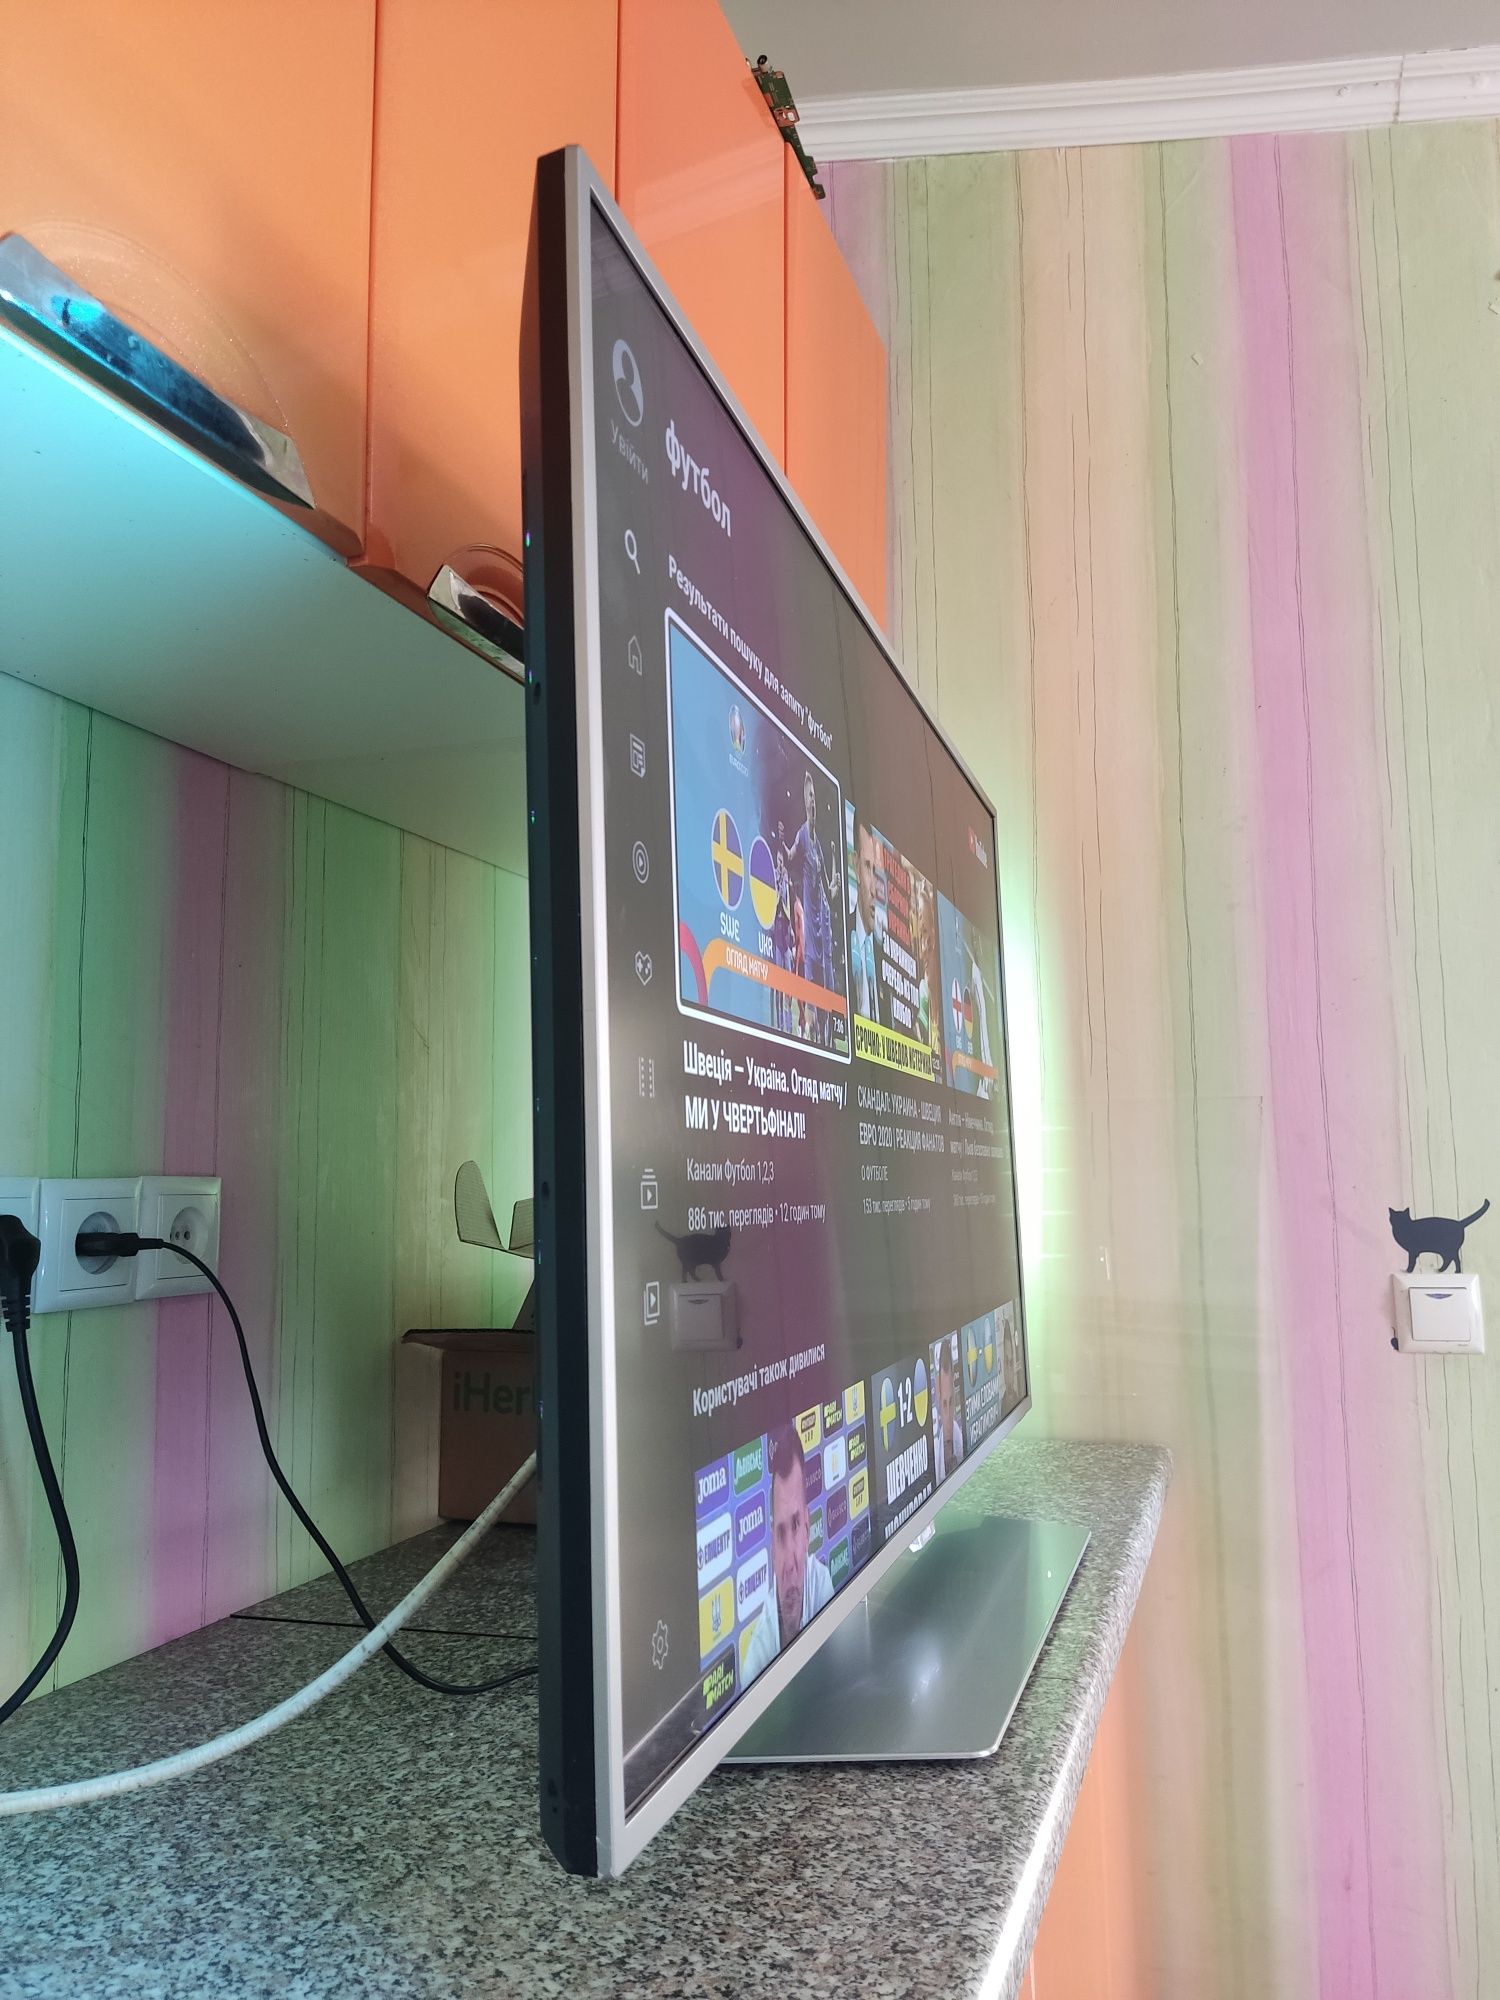 PHILIPS 43PUS6551 4K Ultra HD Android 8 Quad Core, 16 Гб Ambilight !